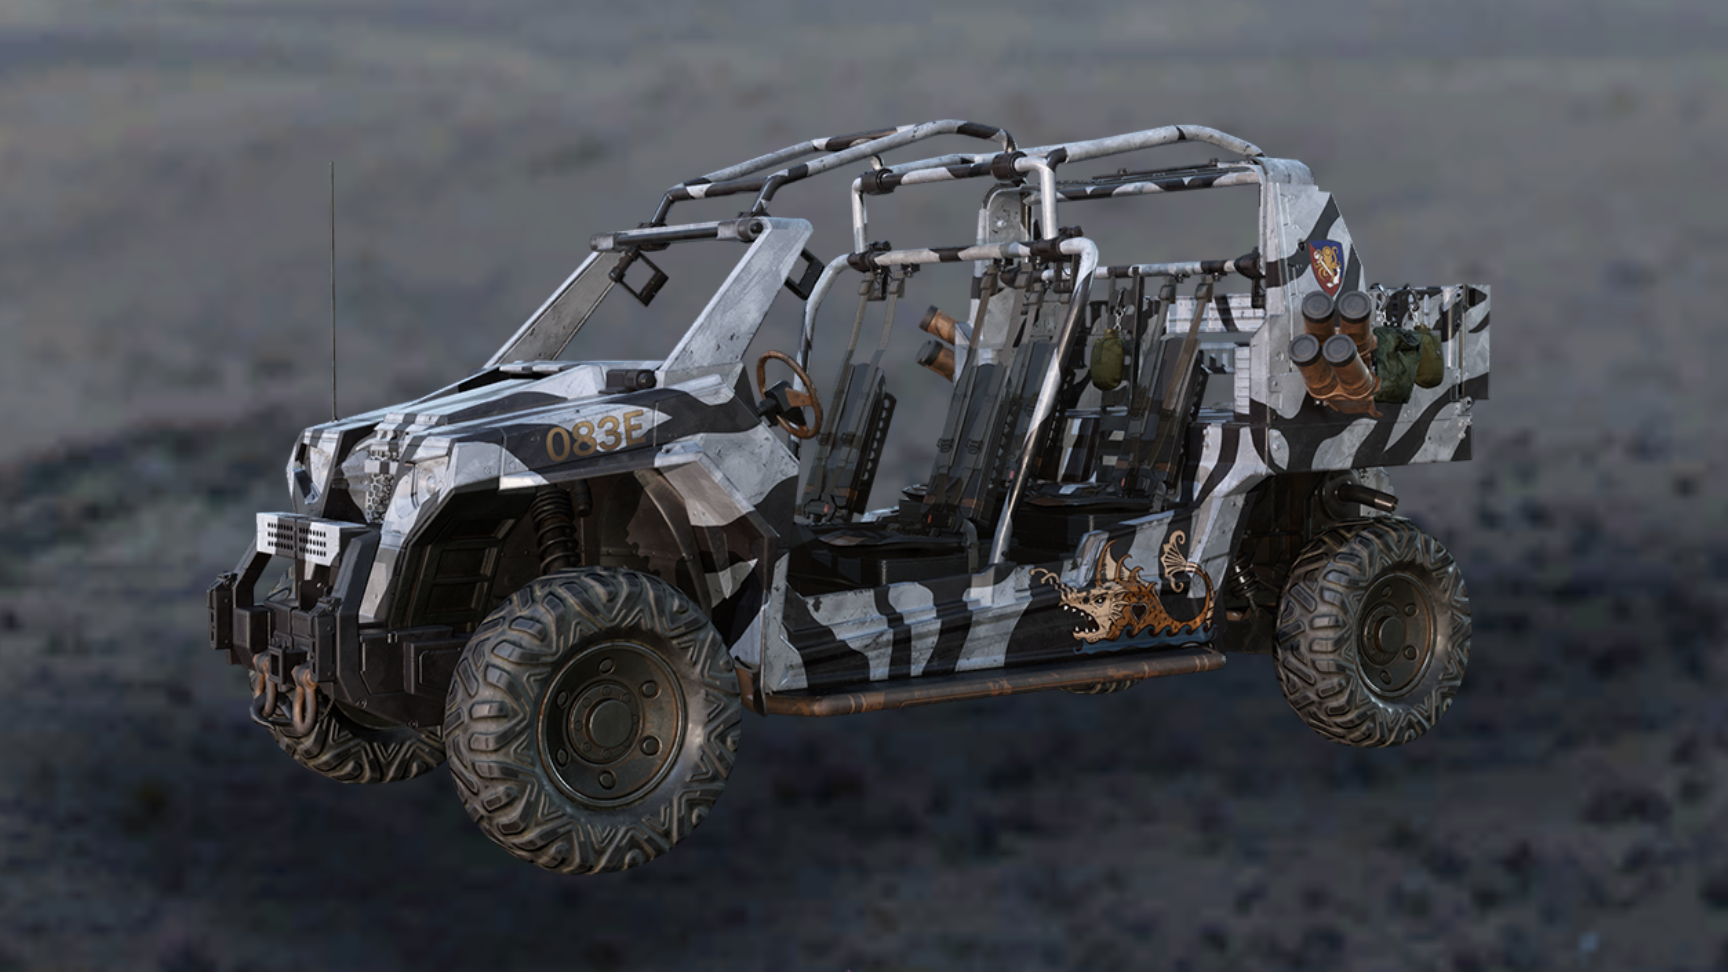 Call of Duty: Warzone - Mako Tac Rover Vehicle Skin DLC PC/PS4/PS5/XBOX One/ Xbox Series X|S CD Key 0.55 usd